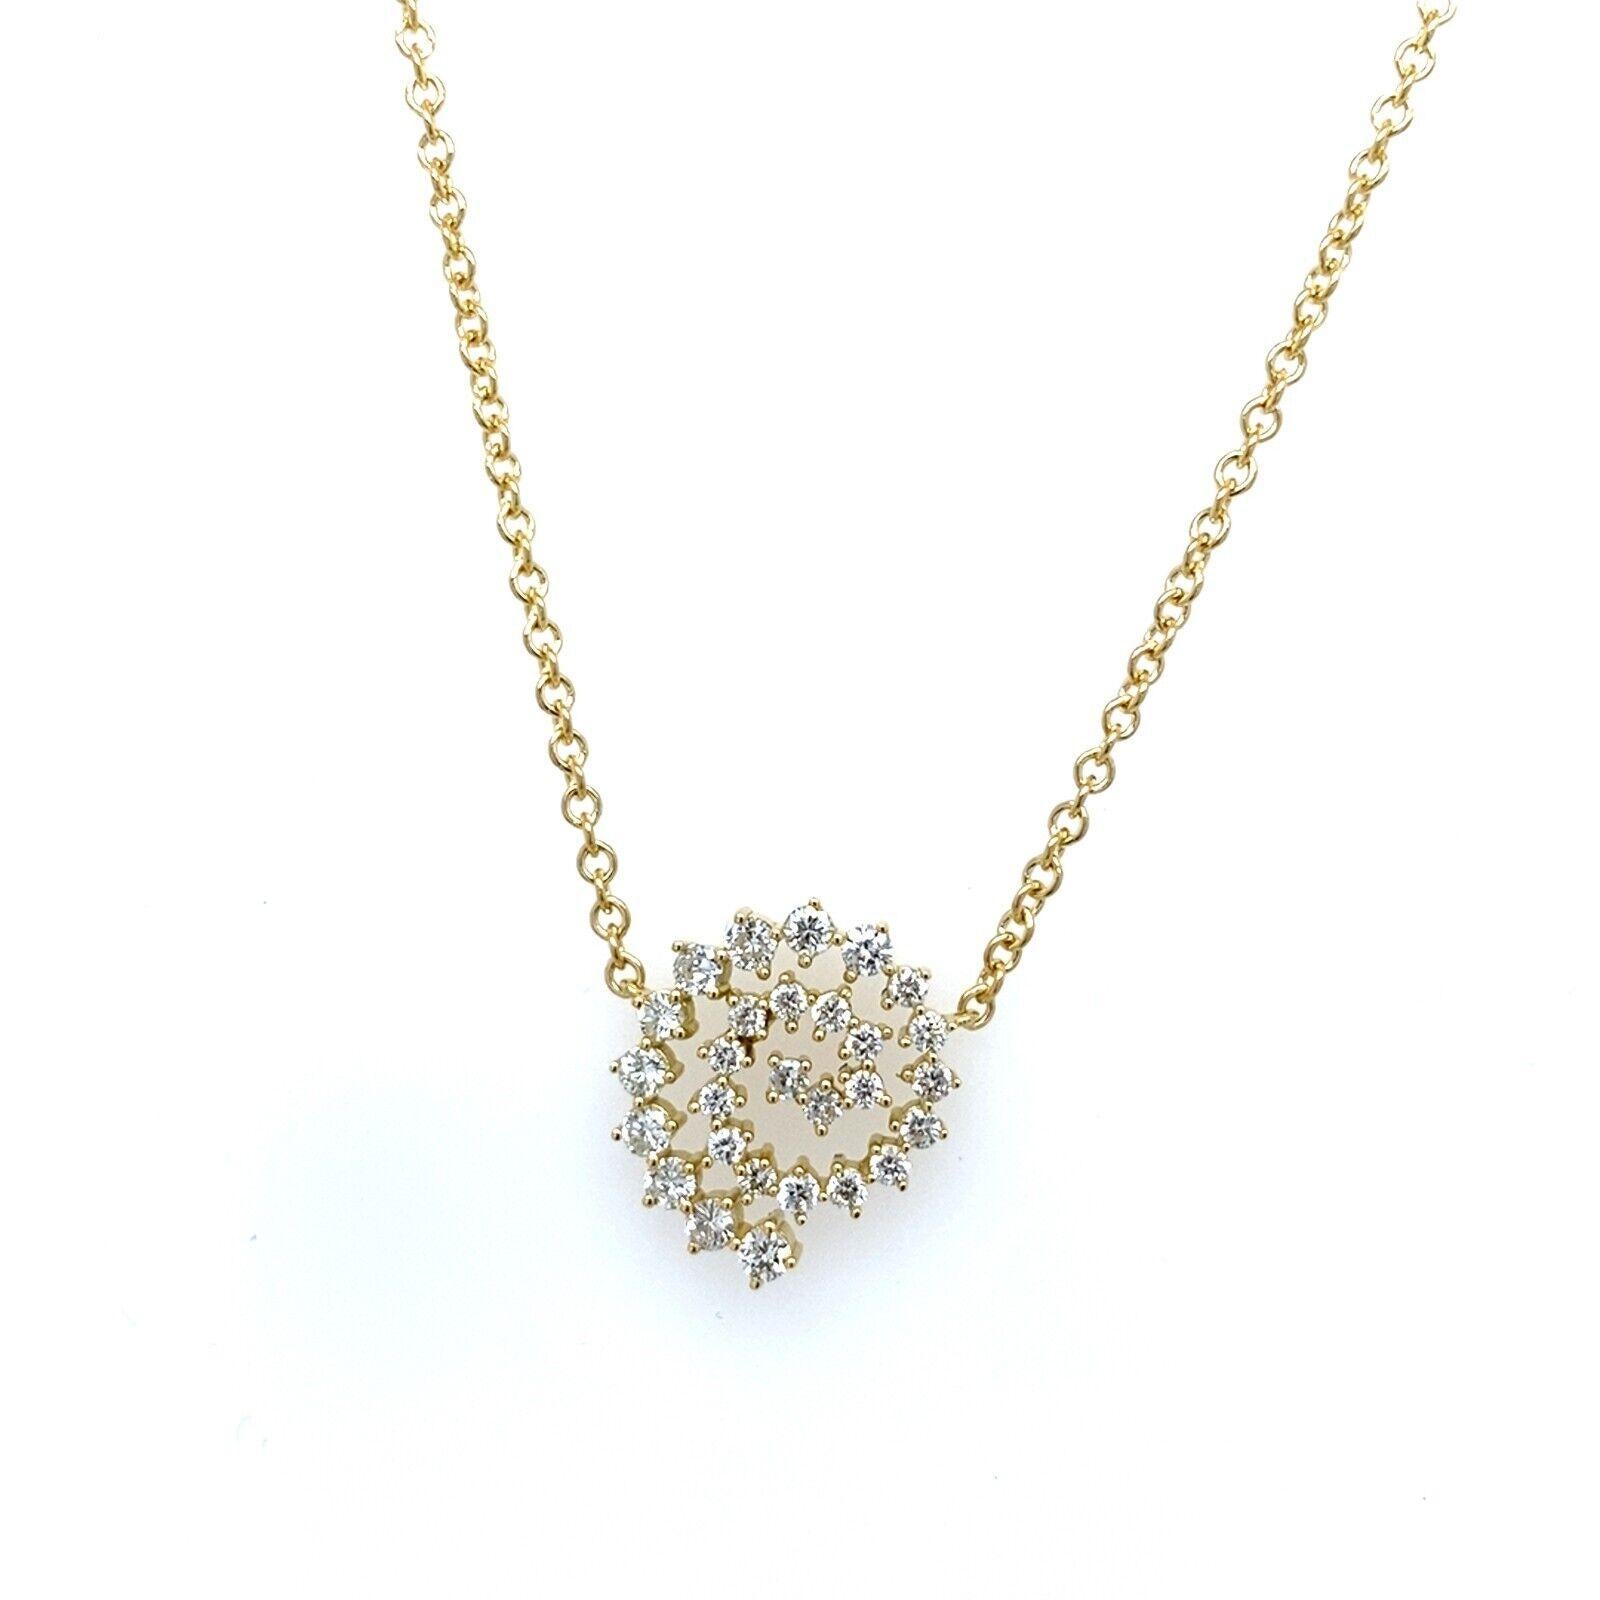 This beautiful diamond swirl pendant is a timeless symbol of memories kept close to your heart. Crafted in 18ct yellow gold, totaling 0.55ct of round brilliant cut diamonds,suspended on 18ct white gold chain, can be worn with a 16-inch or